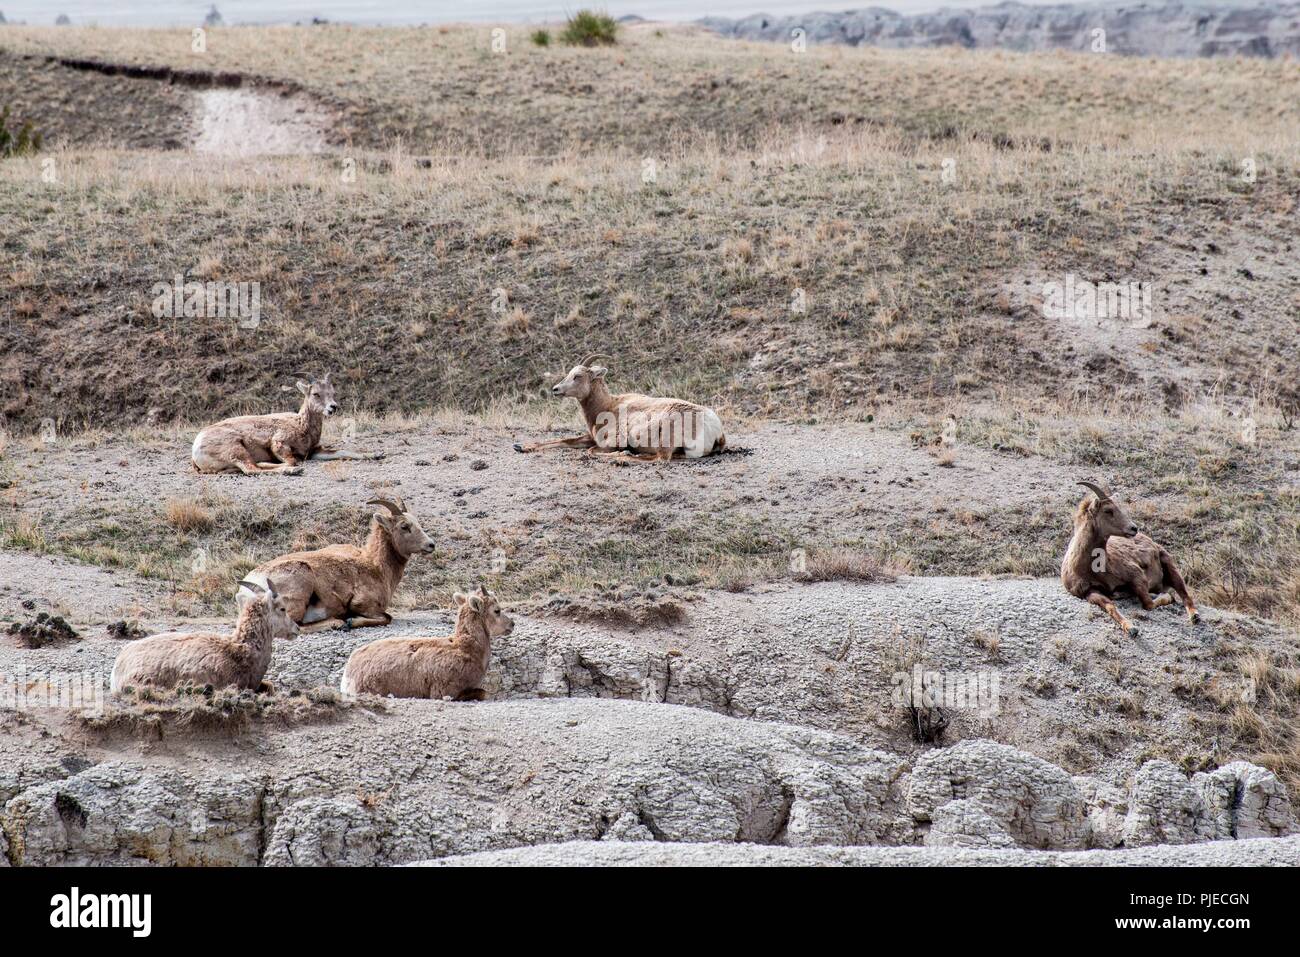 Bighorn Sheep, Ovis canadensis. A herd of Bighorn sheep napping in the Badlands. Stock Photo